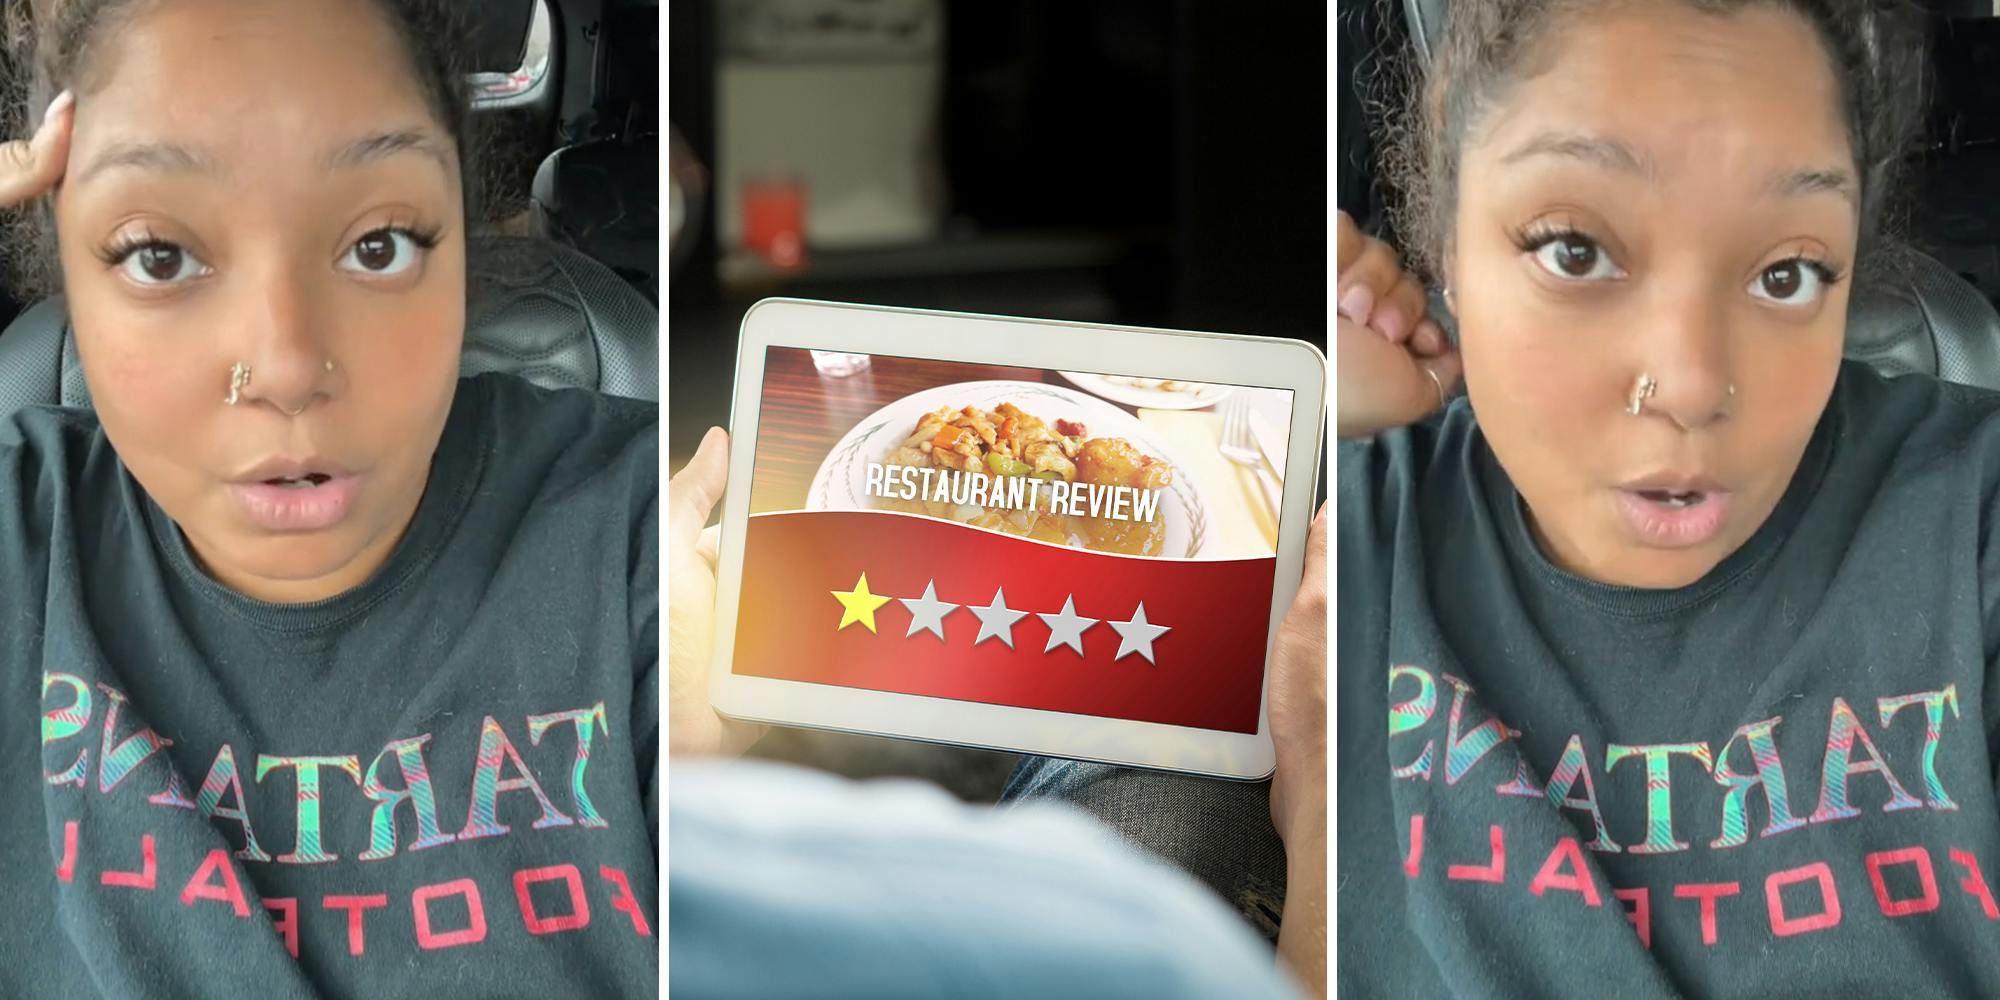 Restaurant customer says the owner doxed her for leaving a bad review